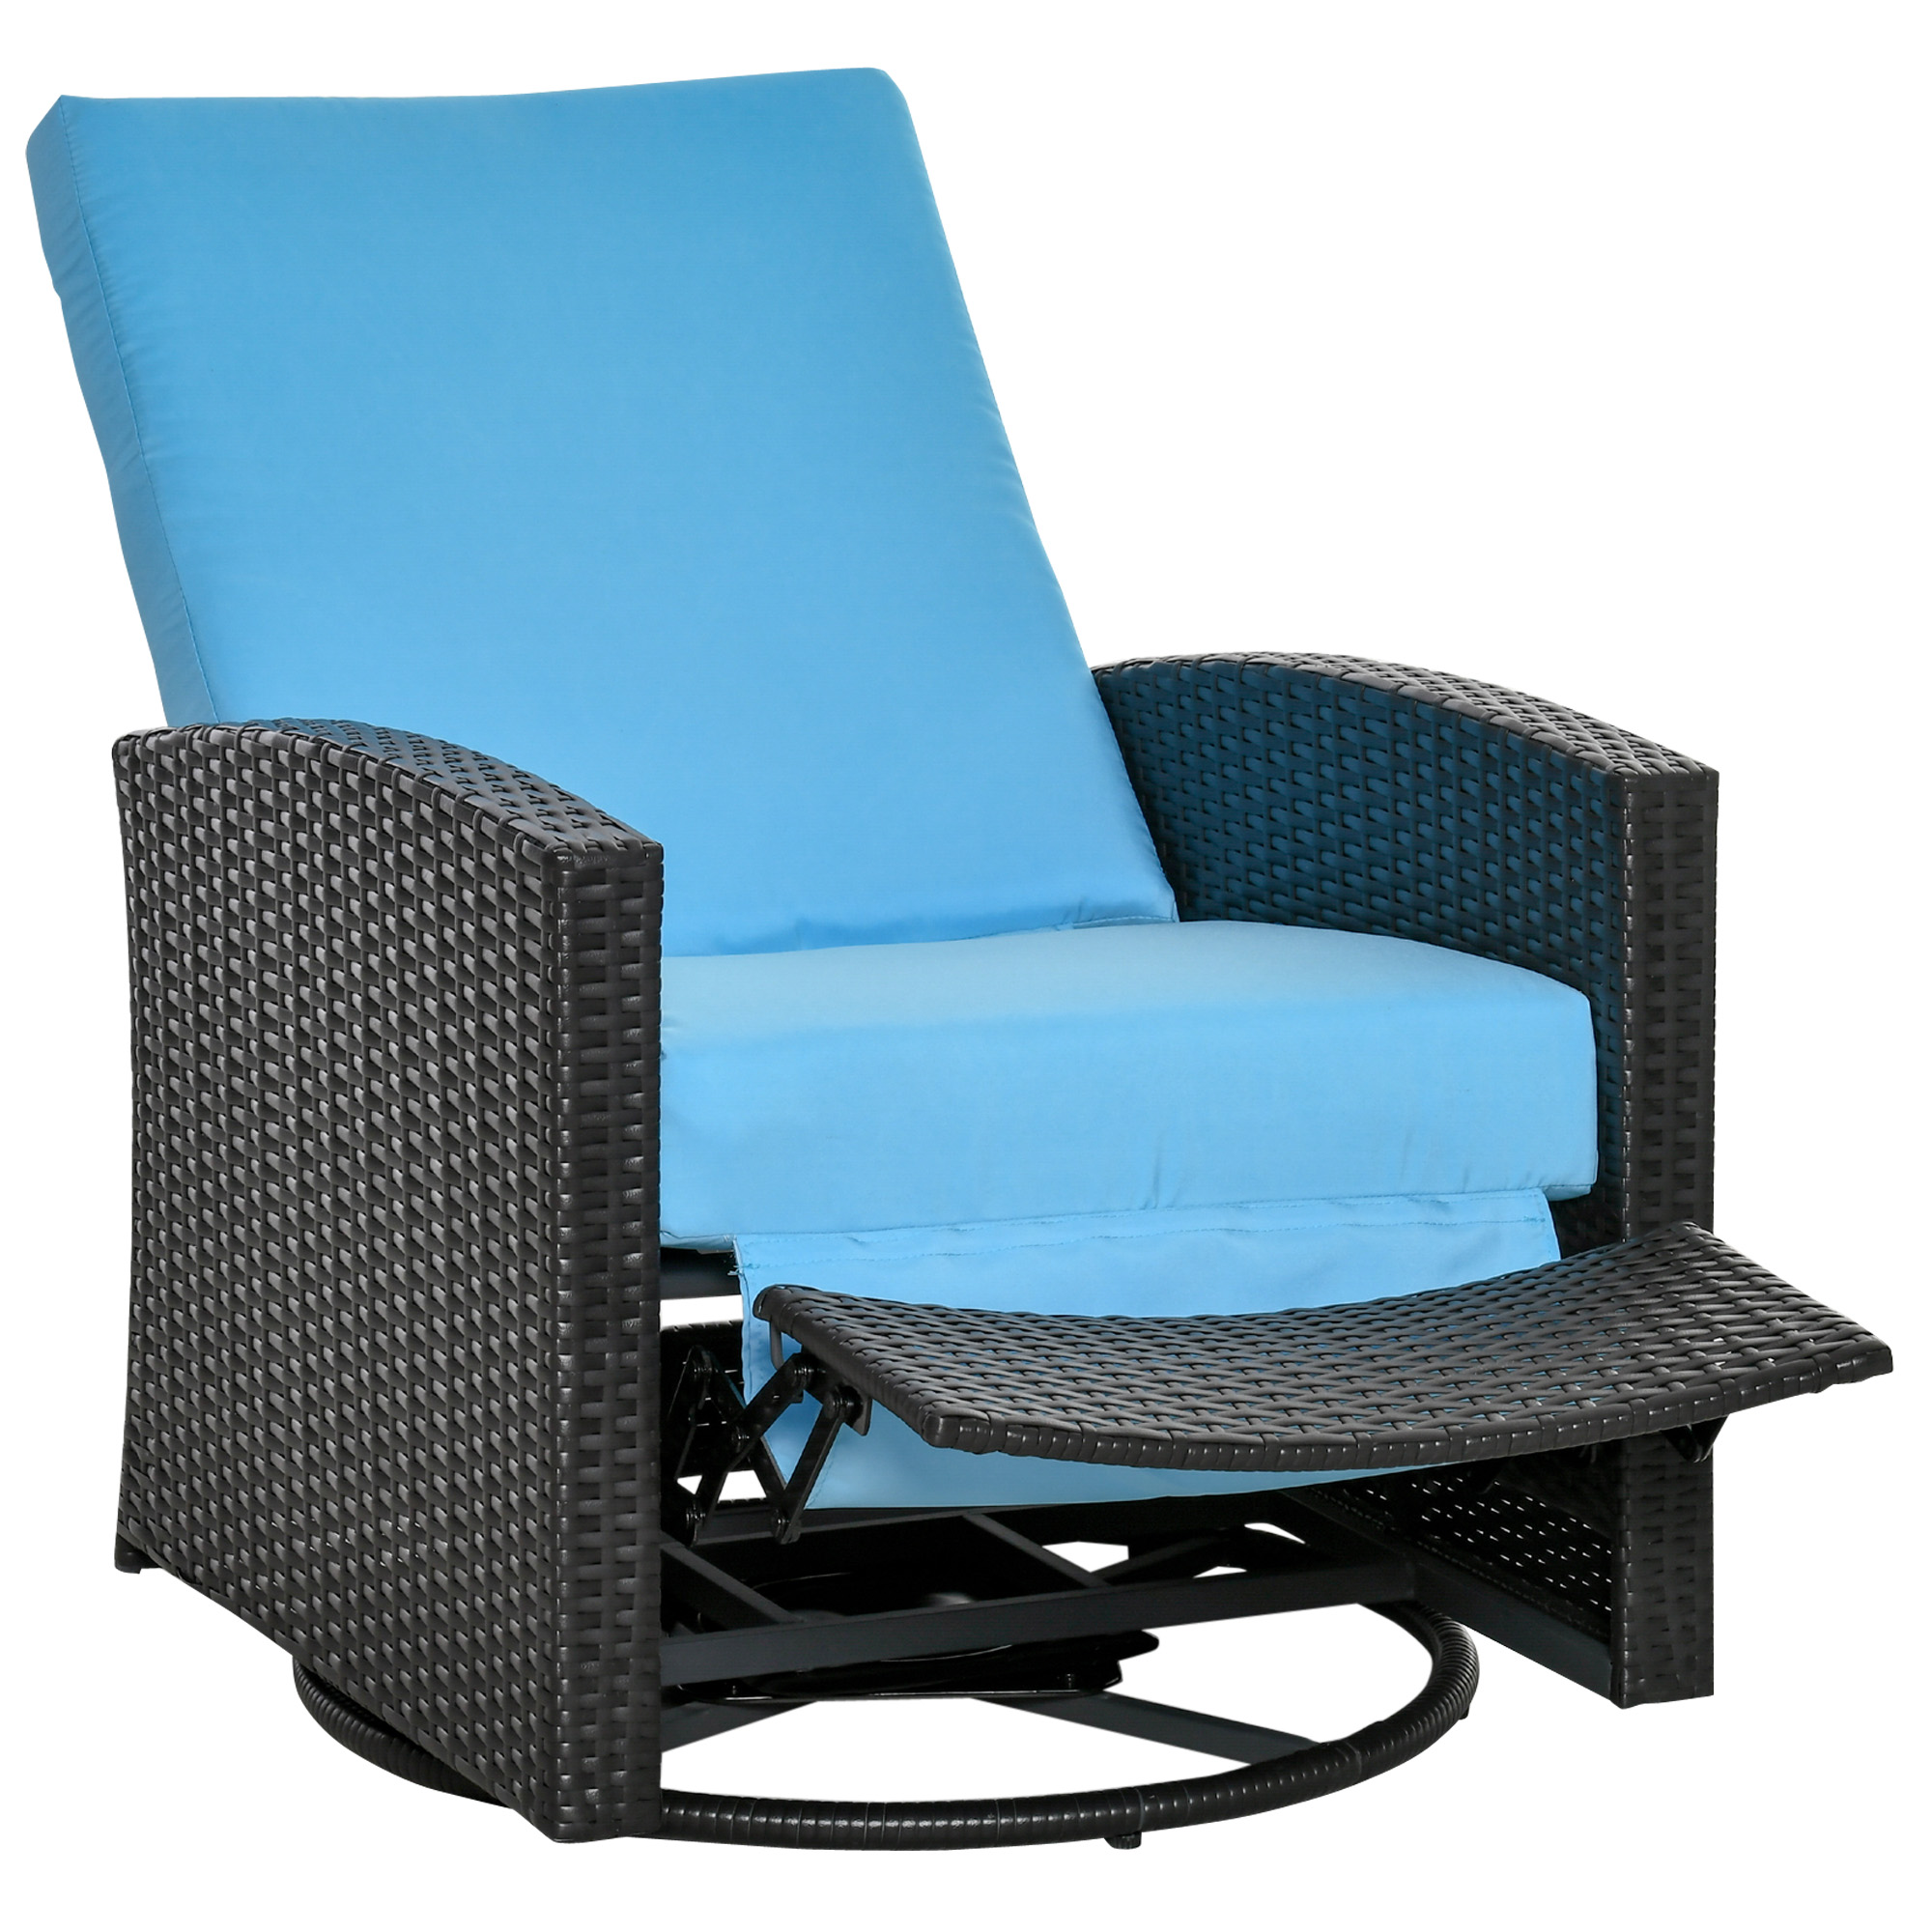 Outsunny Outdoor Wicker Swivel Recliner Chair, Reclining Backrest, Lifting Footrest, 360Â° Rotating Basic, Water Resistant Cushions for Patio, Light Blue - image 1 of 9